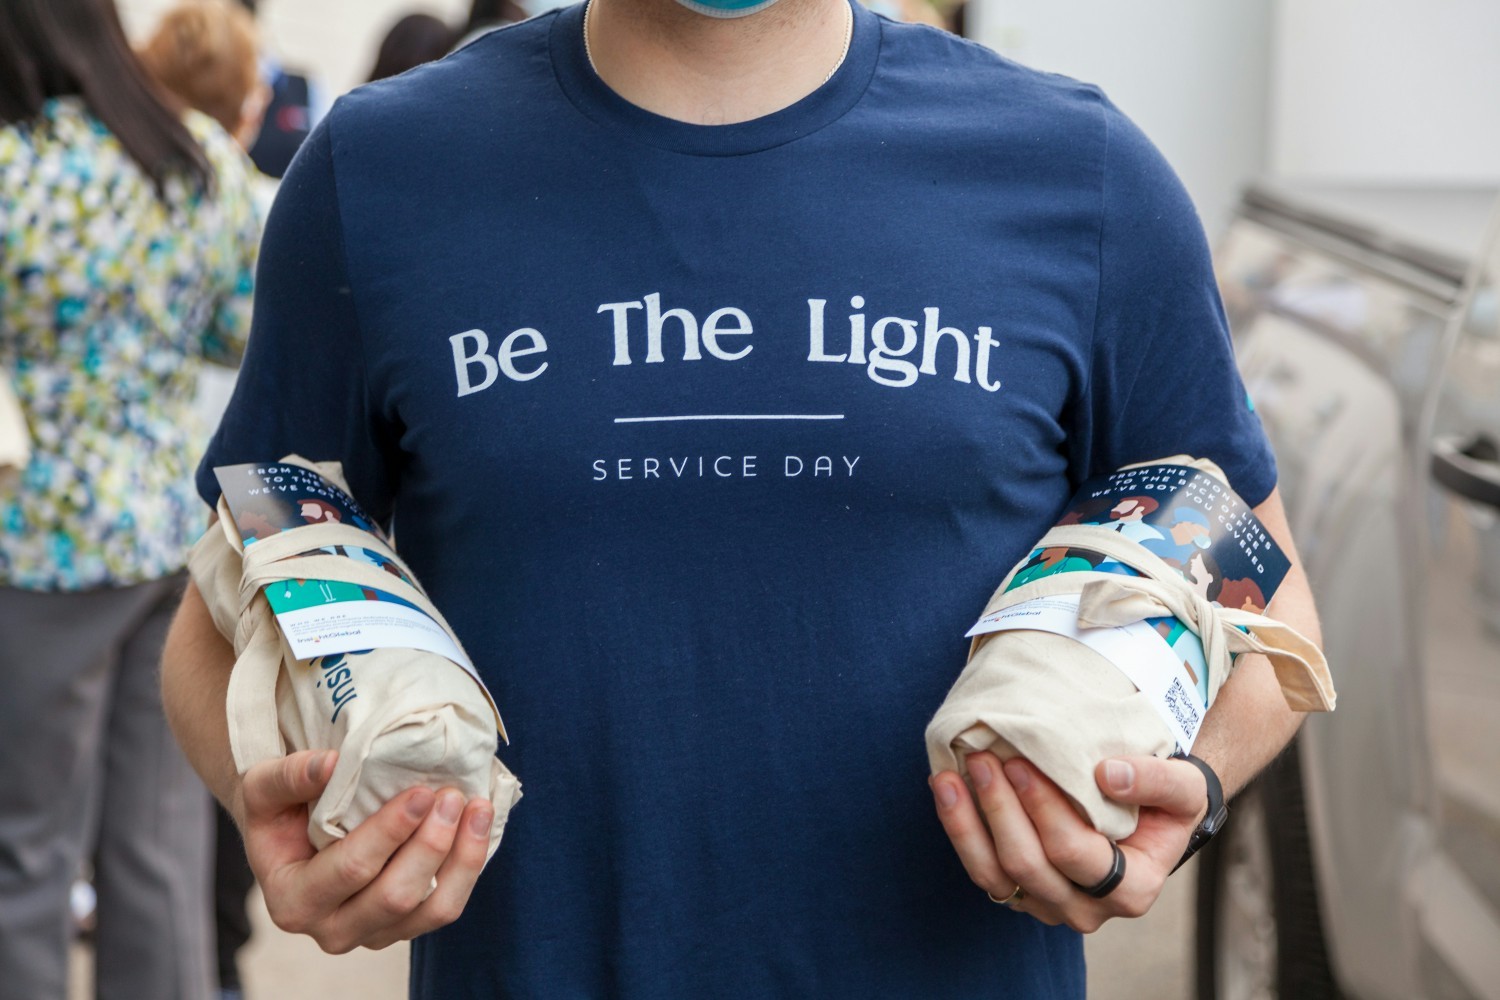 One of our employees working during one of their service days, being the light to the world around them. 